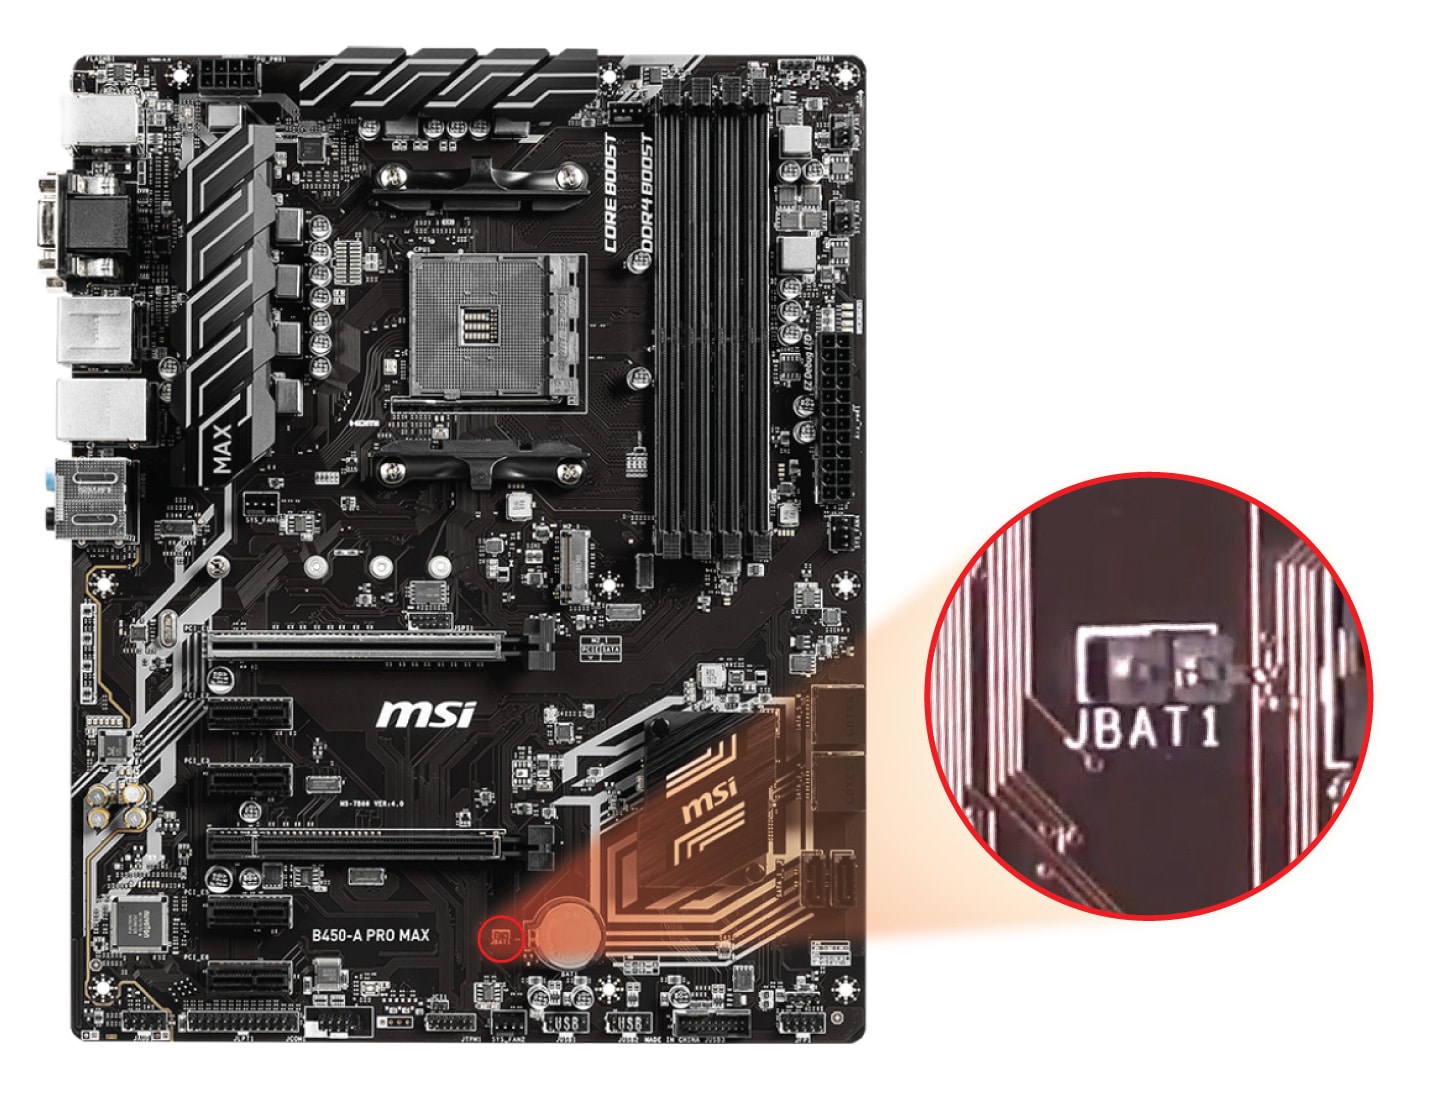 Showing CMOS Jumper location on MSI B450-A PRO (and PRO MAX) motherboard.